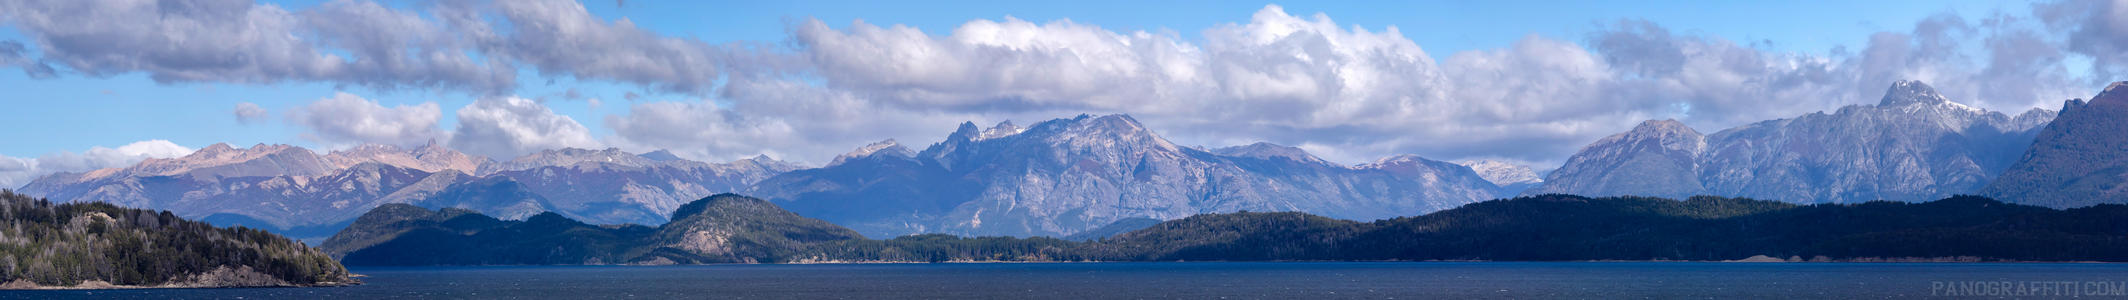 Nahuel Huapi on Rt 231 - Just one example of a mountains and lakes from the Neuquen region